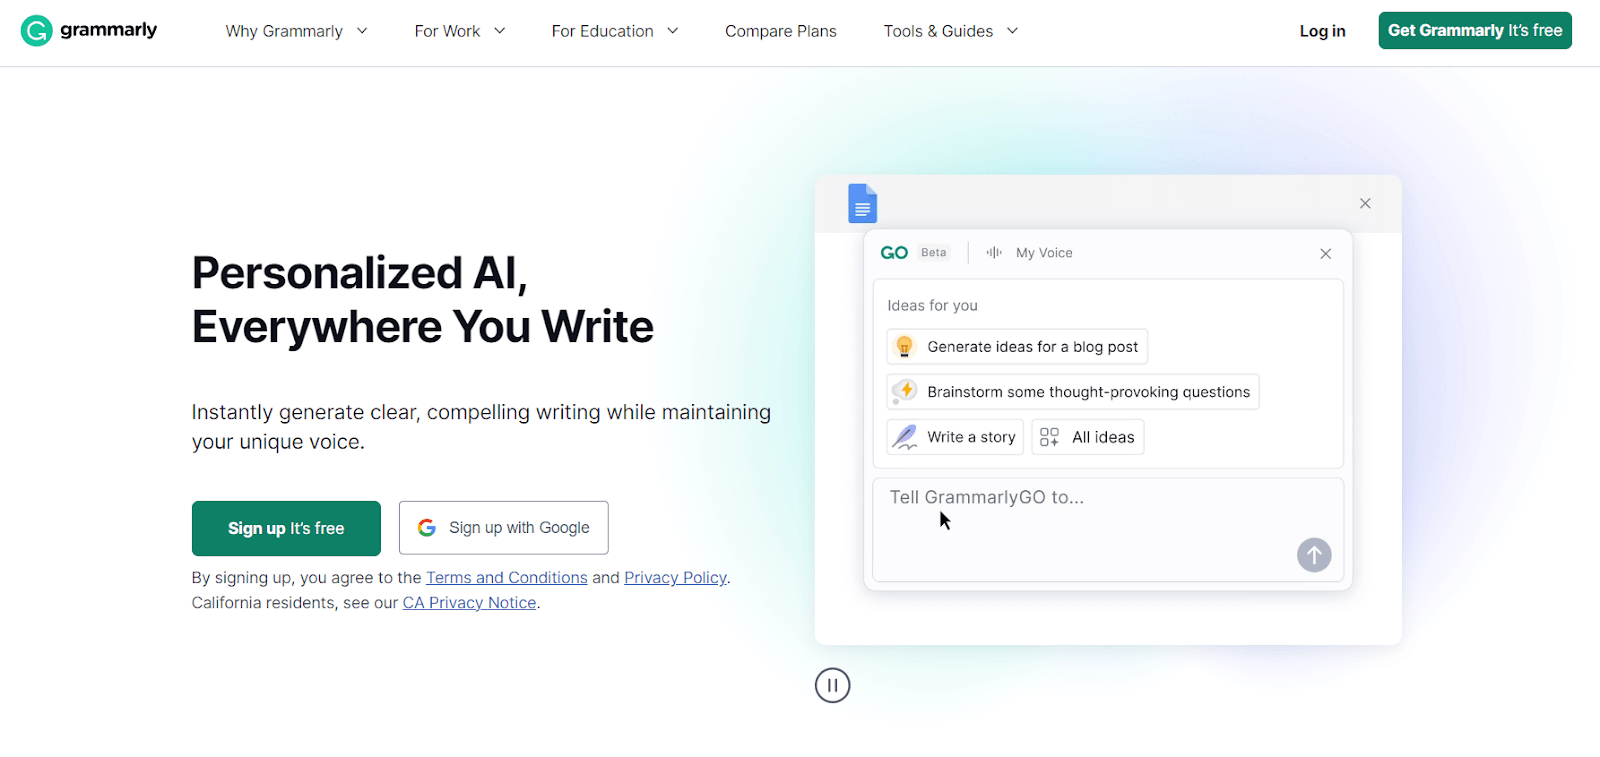 grammarly website - free writing ai assistance